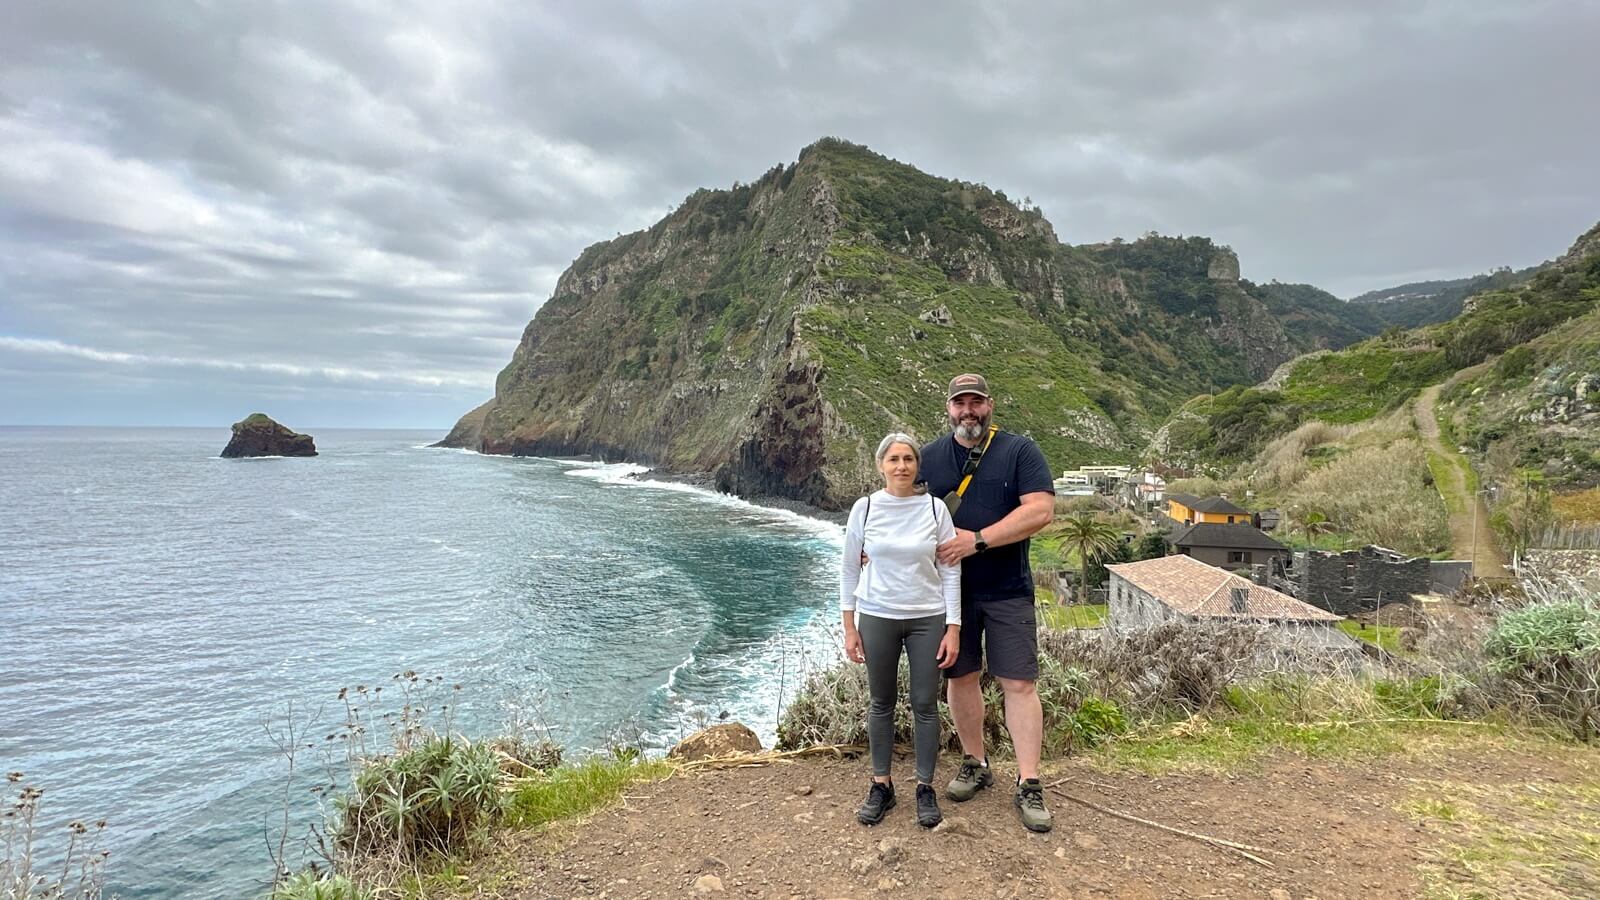 The True Flavours & Natural Beauty of Madeira Islands - Sean & Angie Madeira Islands